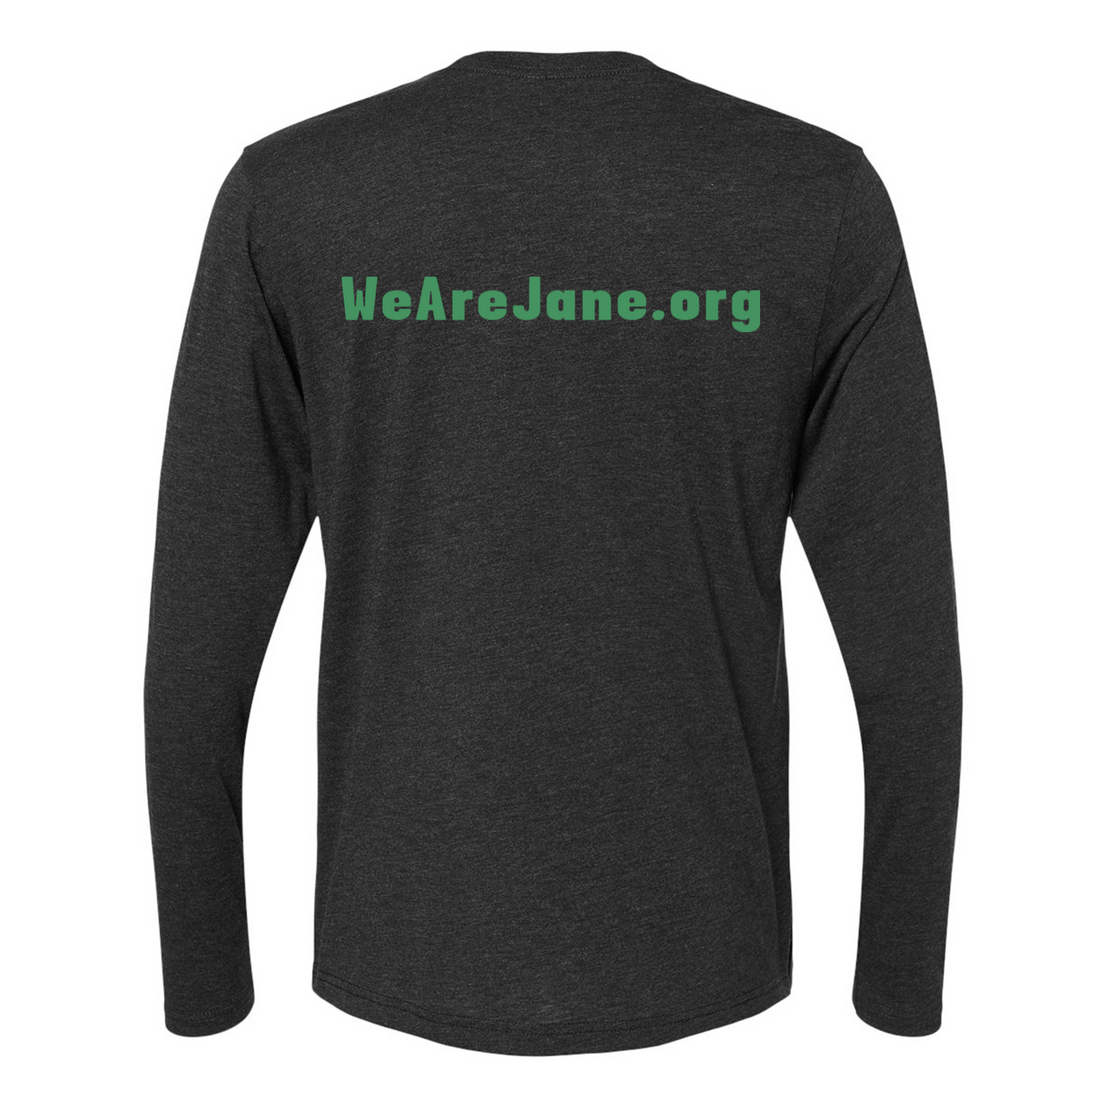 Unisex JANE Long Sleeve T-Shirt in Black with Green Letters